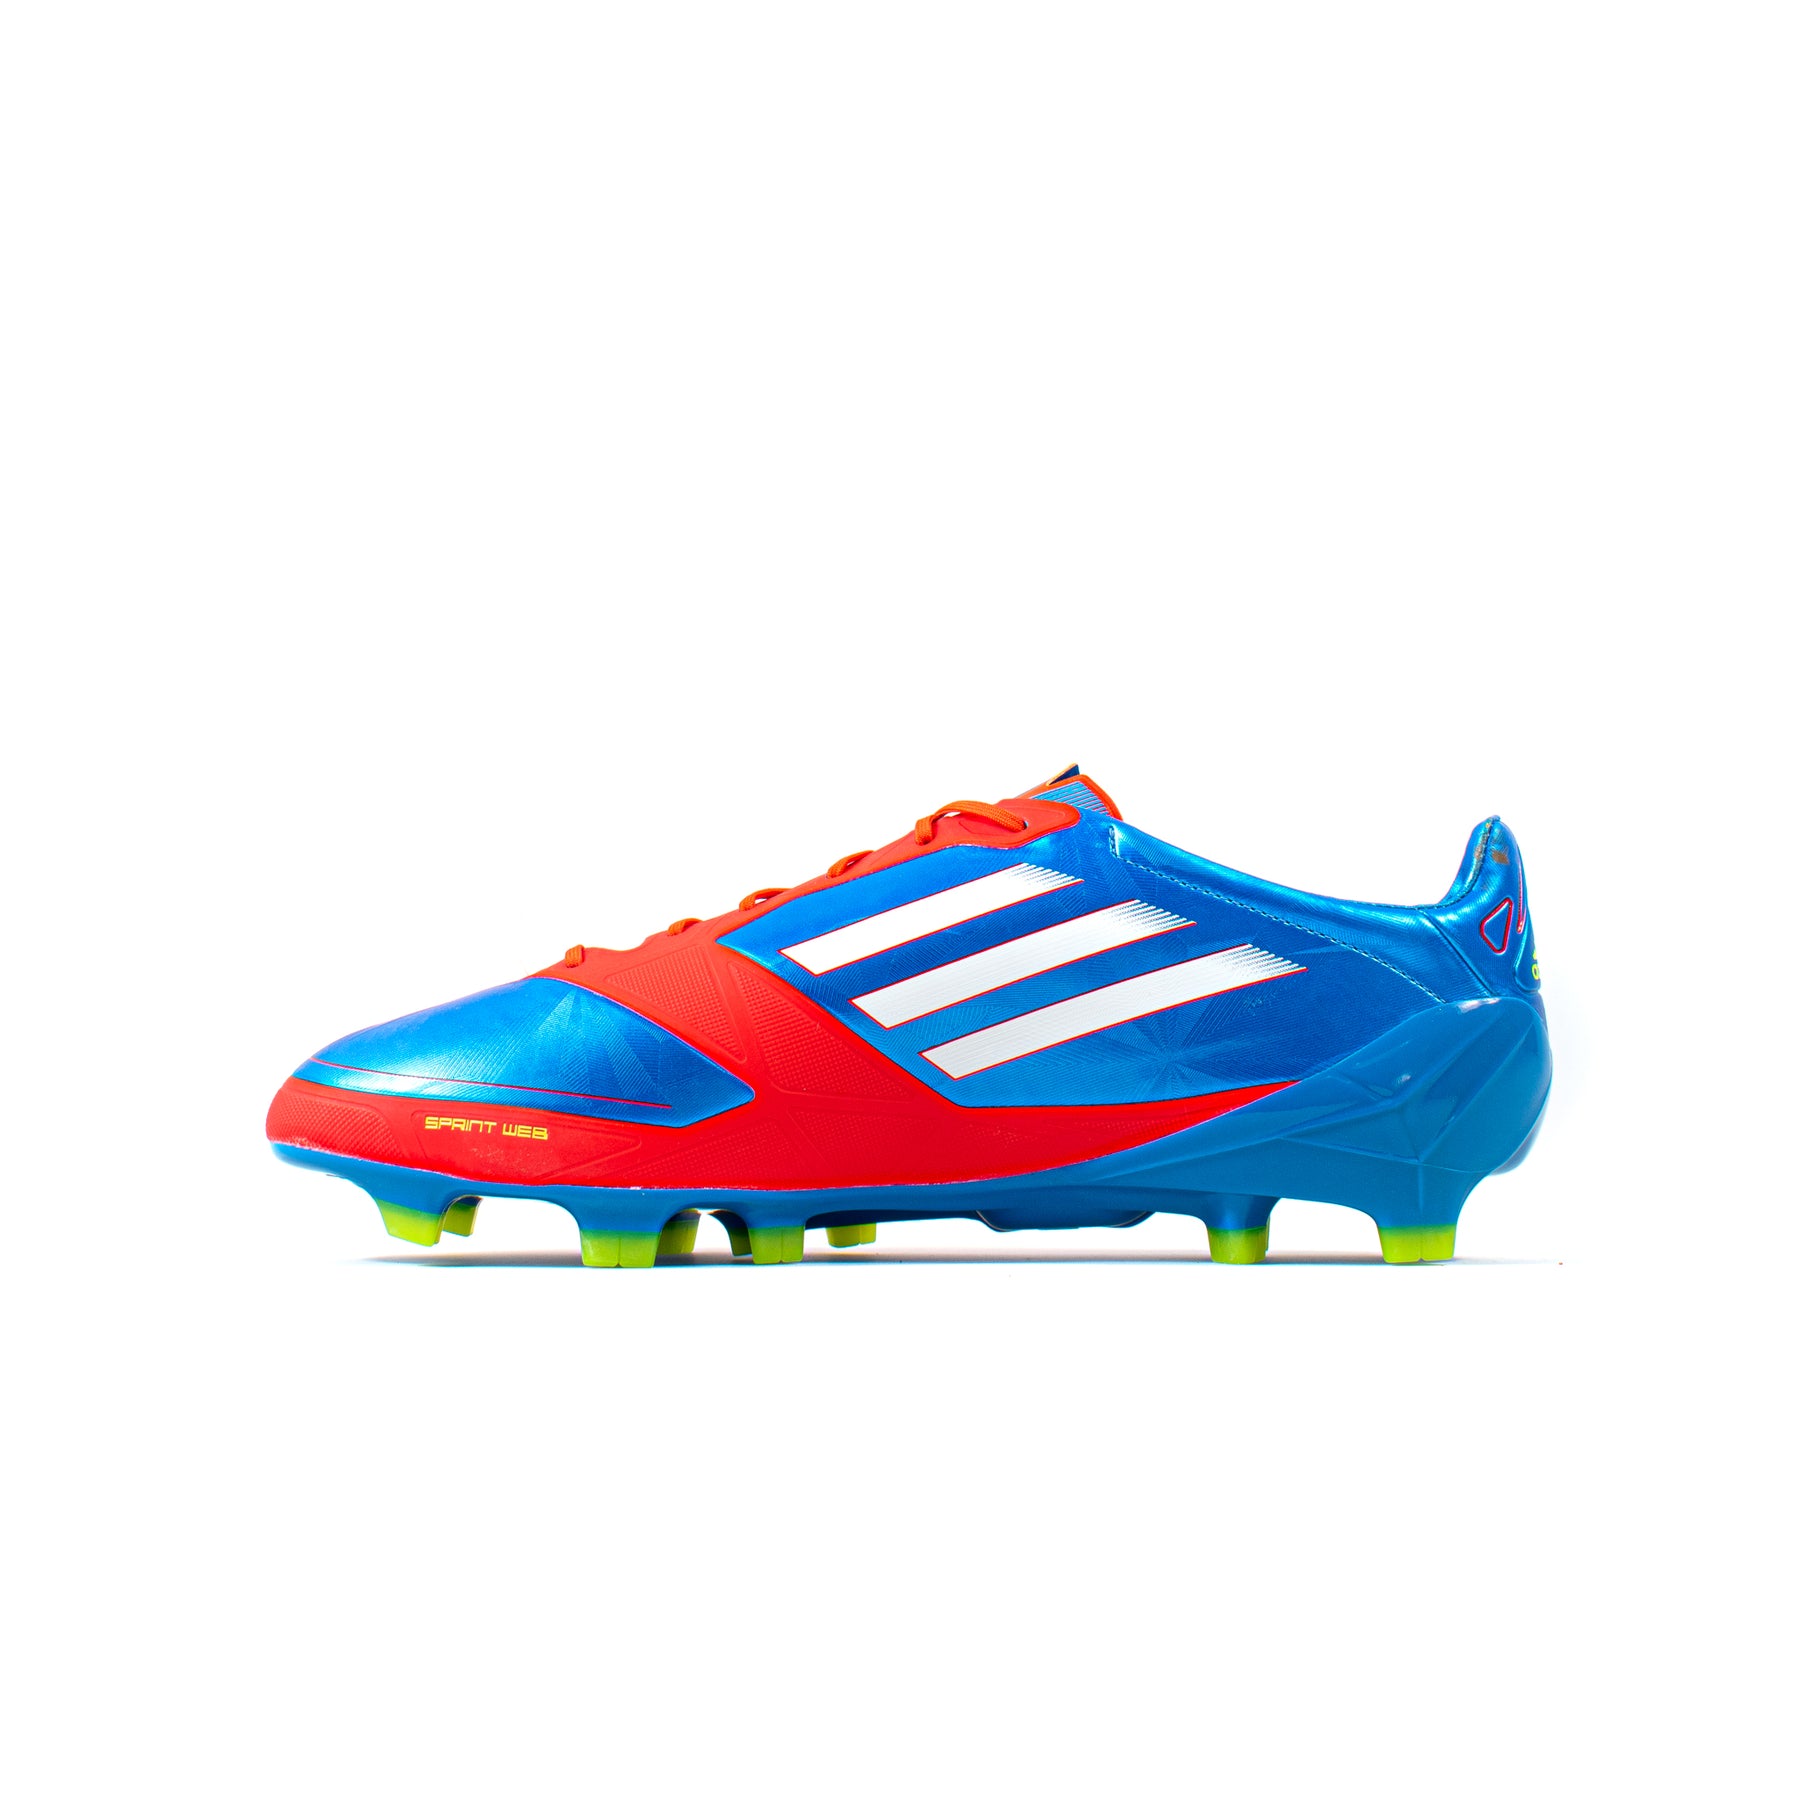 bestrating Symptomen Op tijd Adidas F50 Adizero Blue Red Synthetic FG – Classic Soccer Cleats